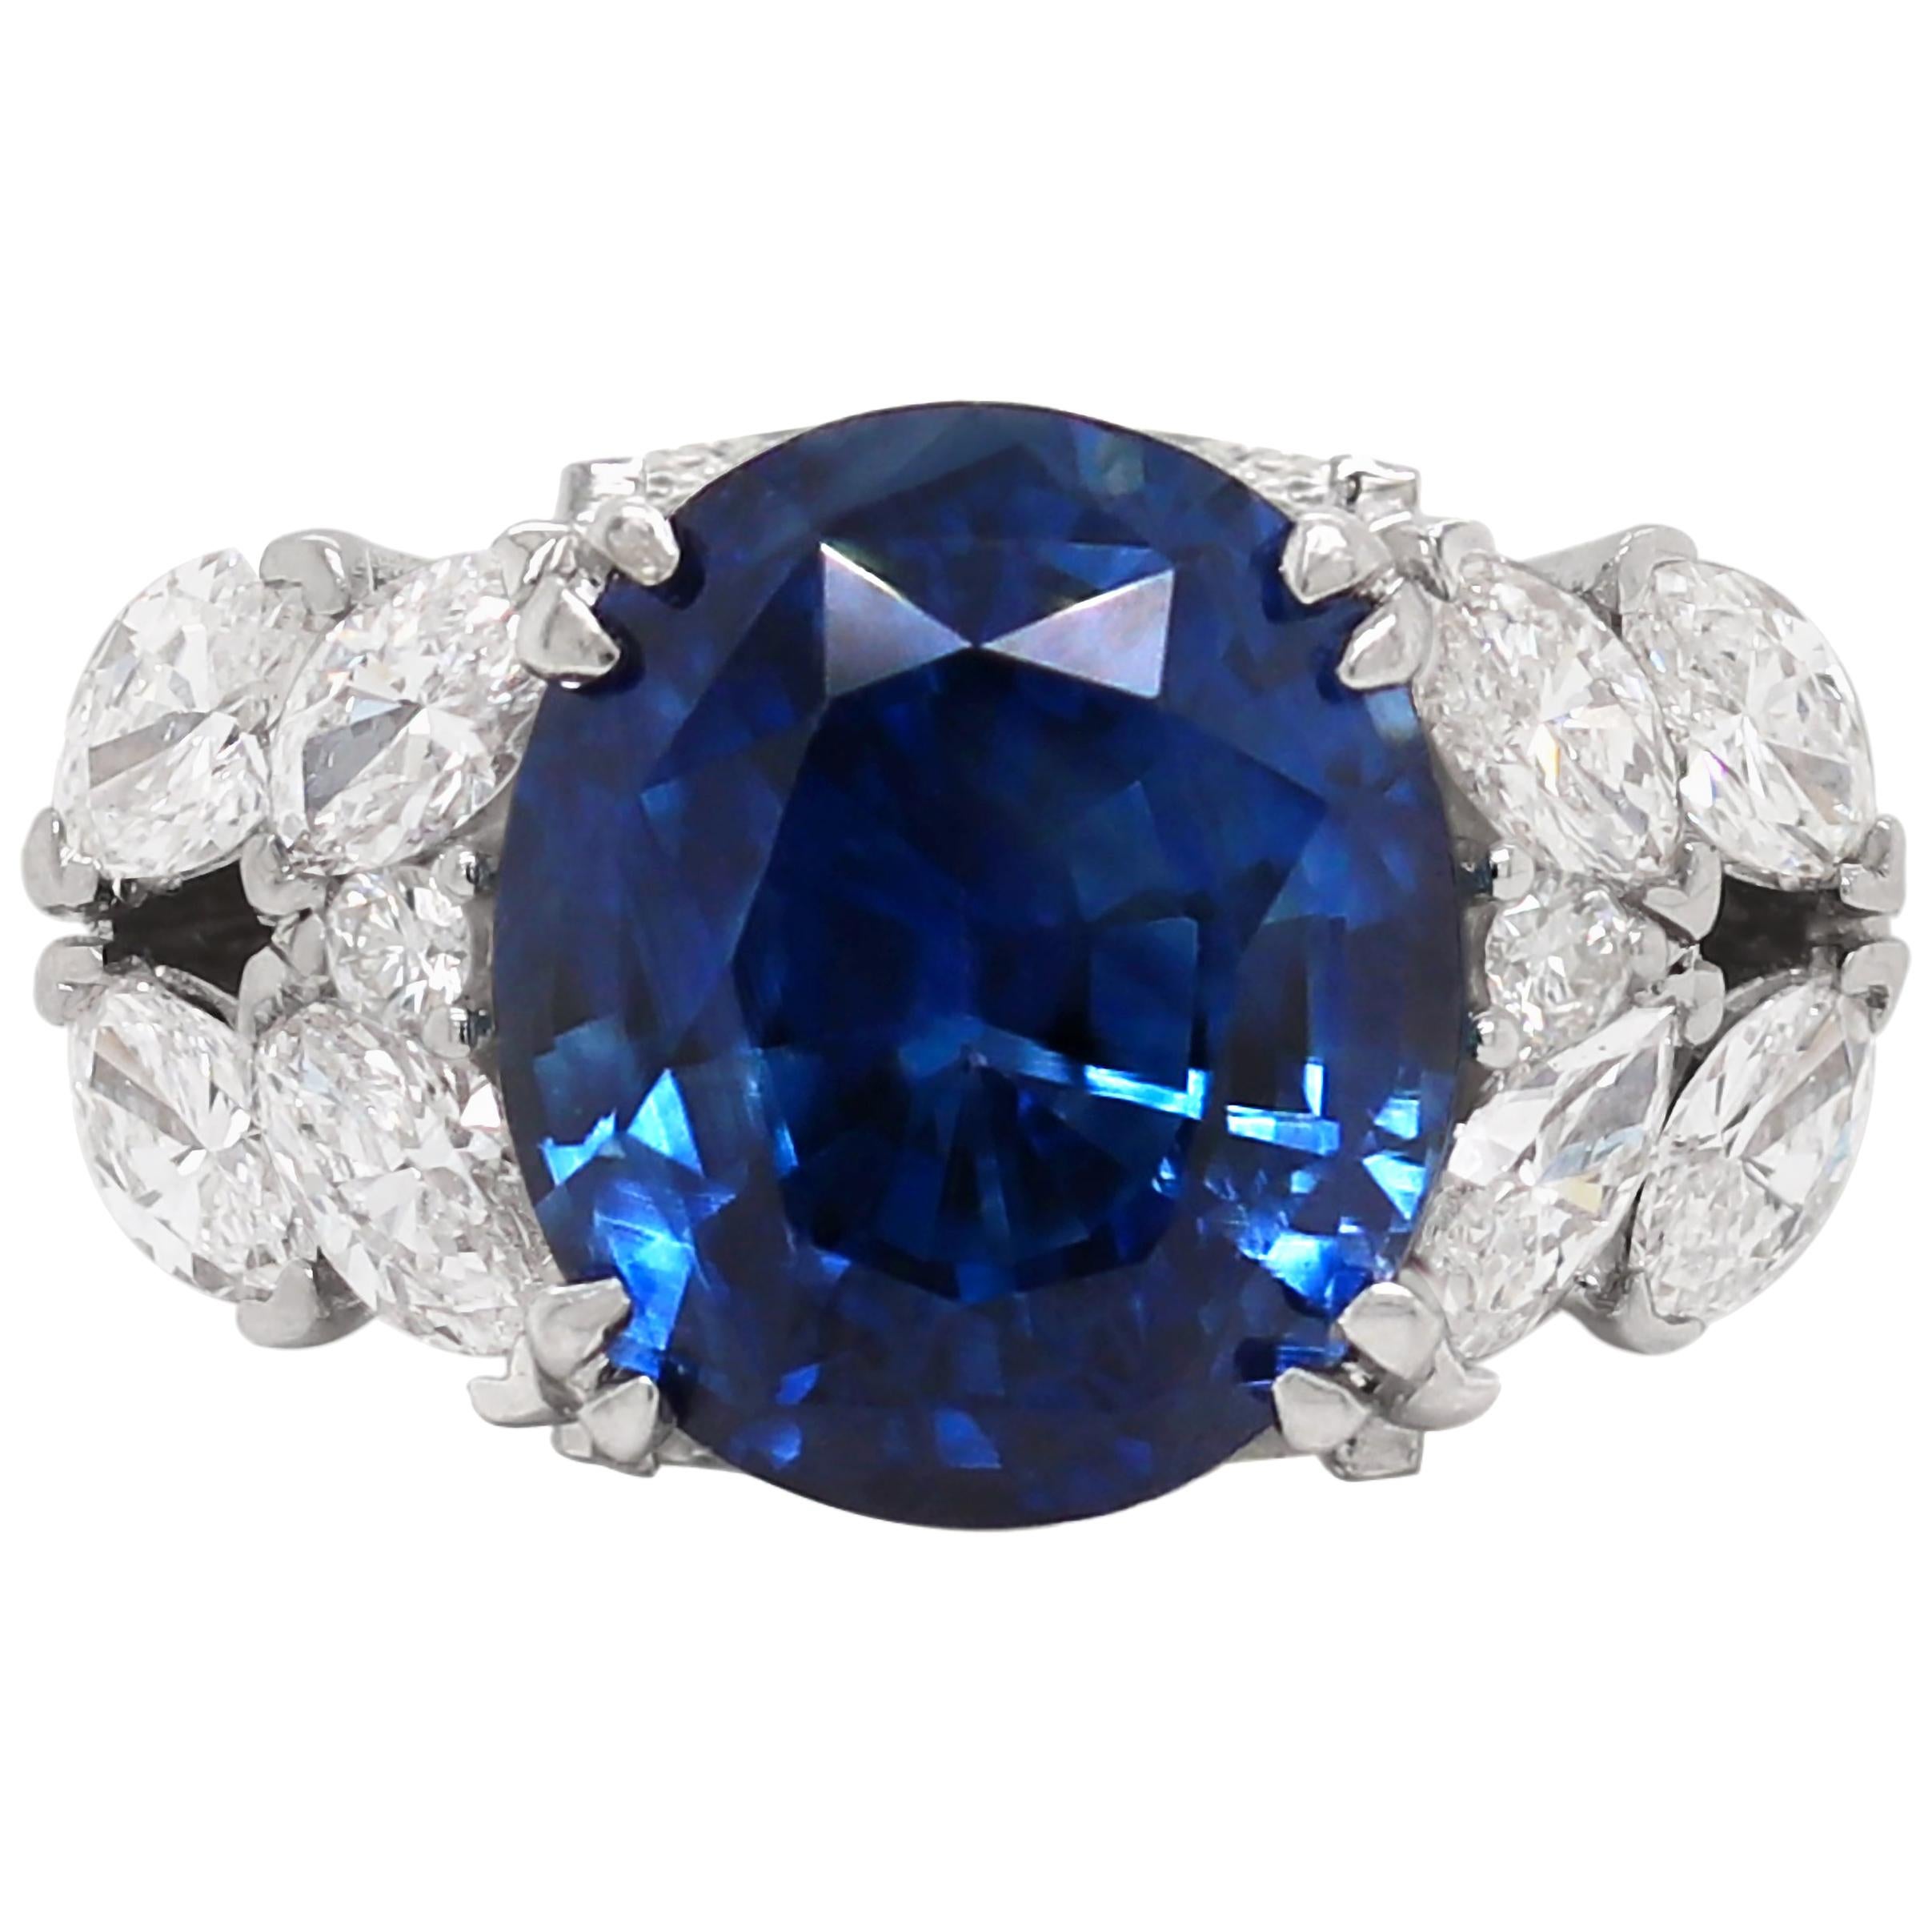 11.92 Carat Natural Unheated Blue Sapphire and Diamond 18ct Gold Cocktail Ring